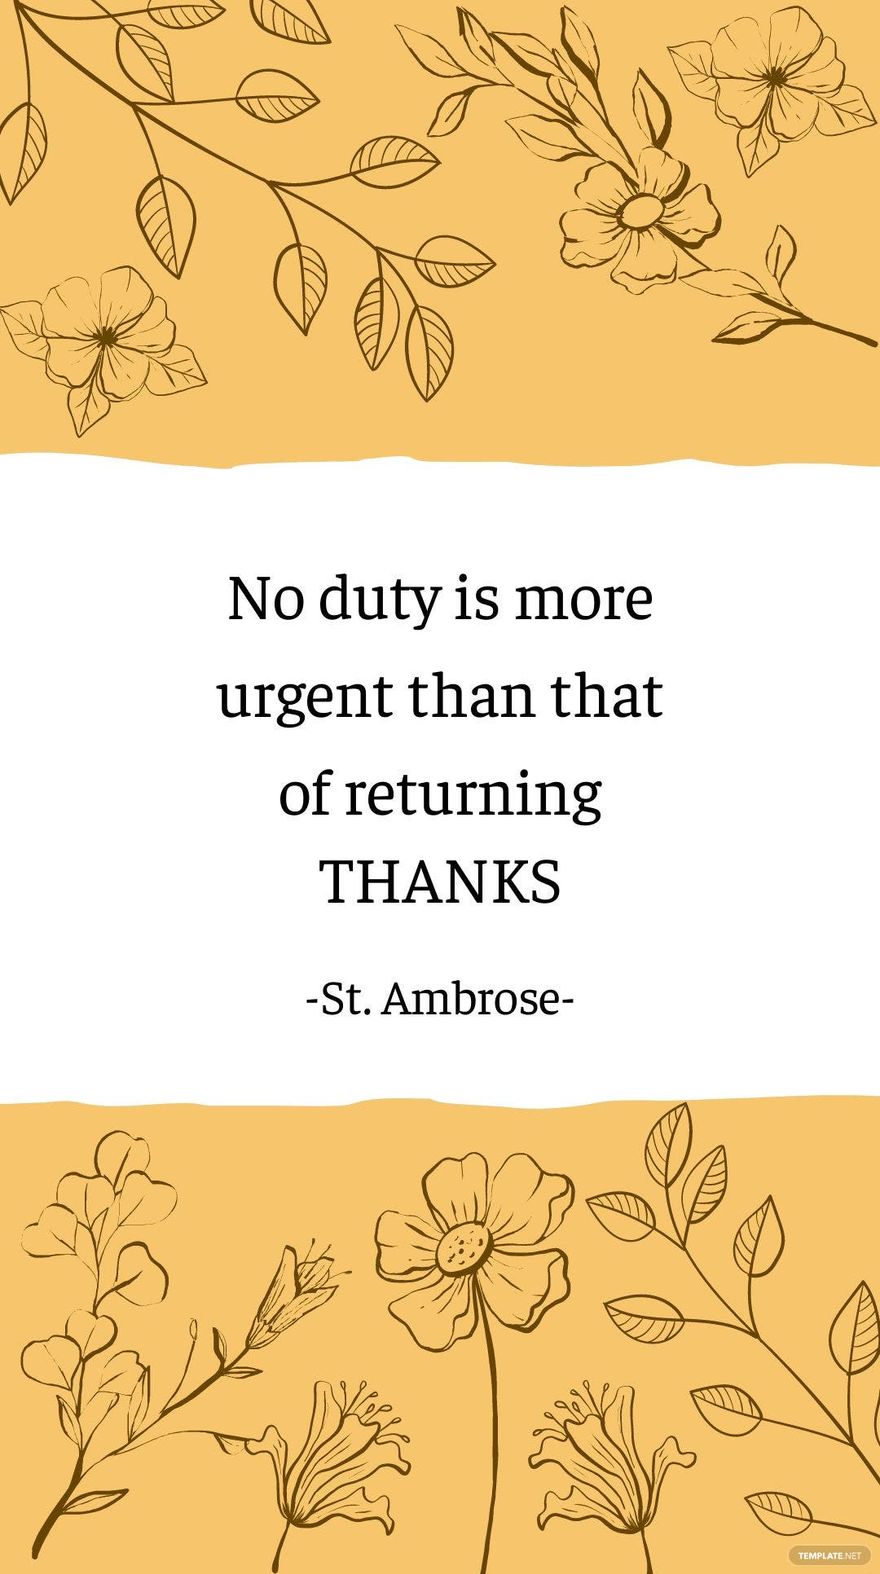 Free St. Ambrose - No duty is more urgent than that of returning thanks